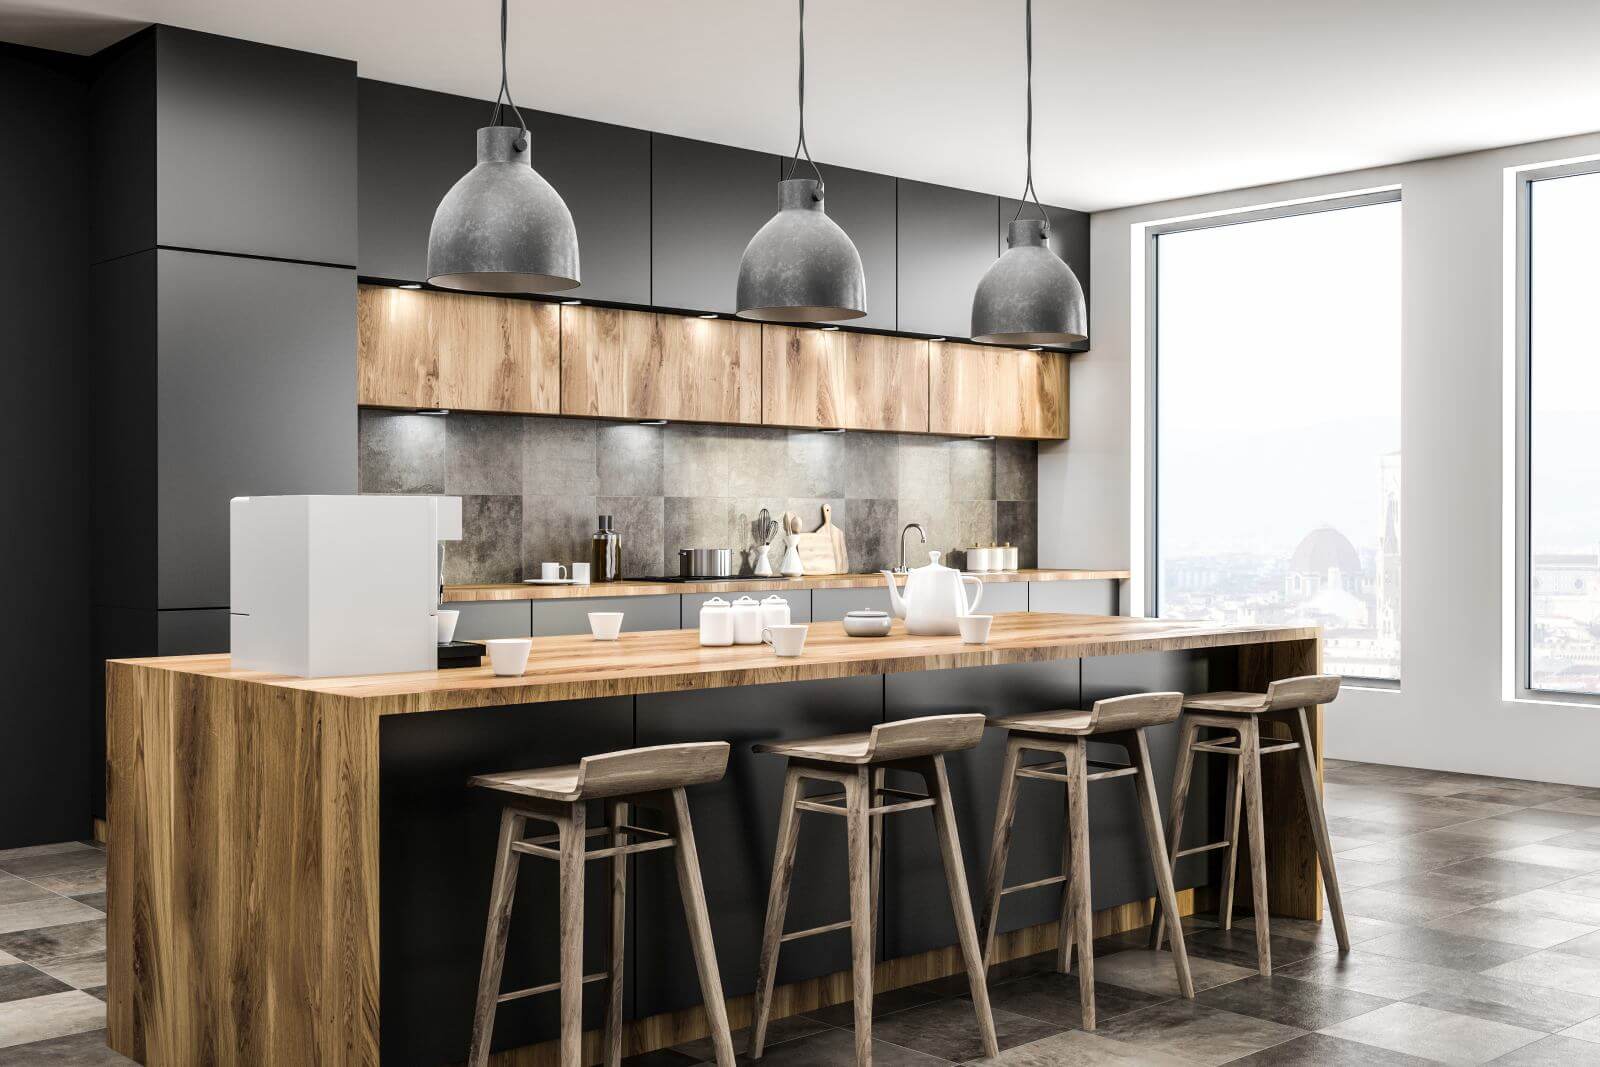 Corner of loft kitchen with tiled floor, gray countertops and long bar with wooden stools. Window with european city scenery. 3d rendering